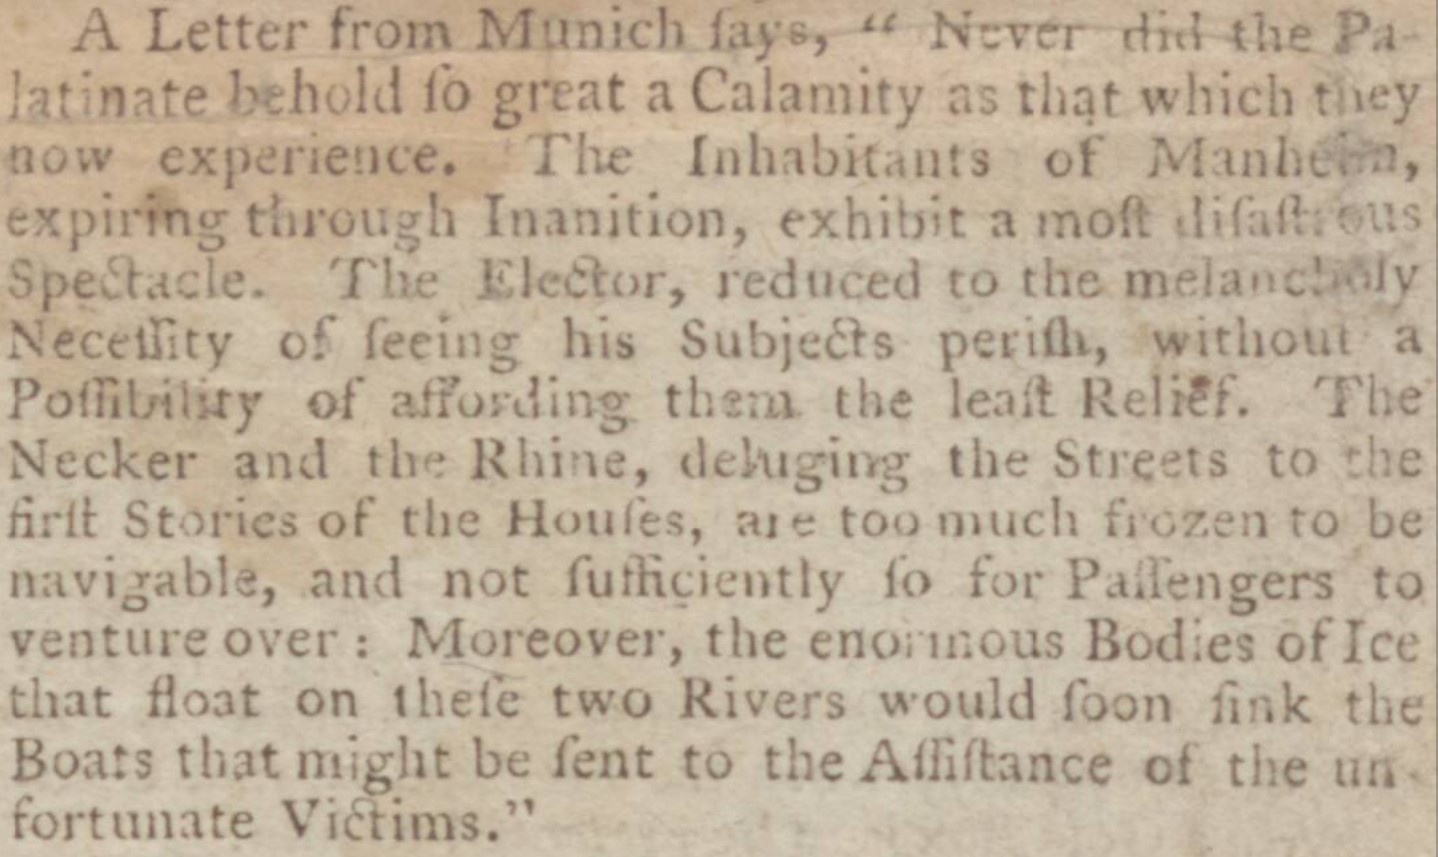 Article published in the March 1, 1784, Northampton Mercury describing flooding in Munich.